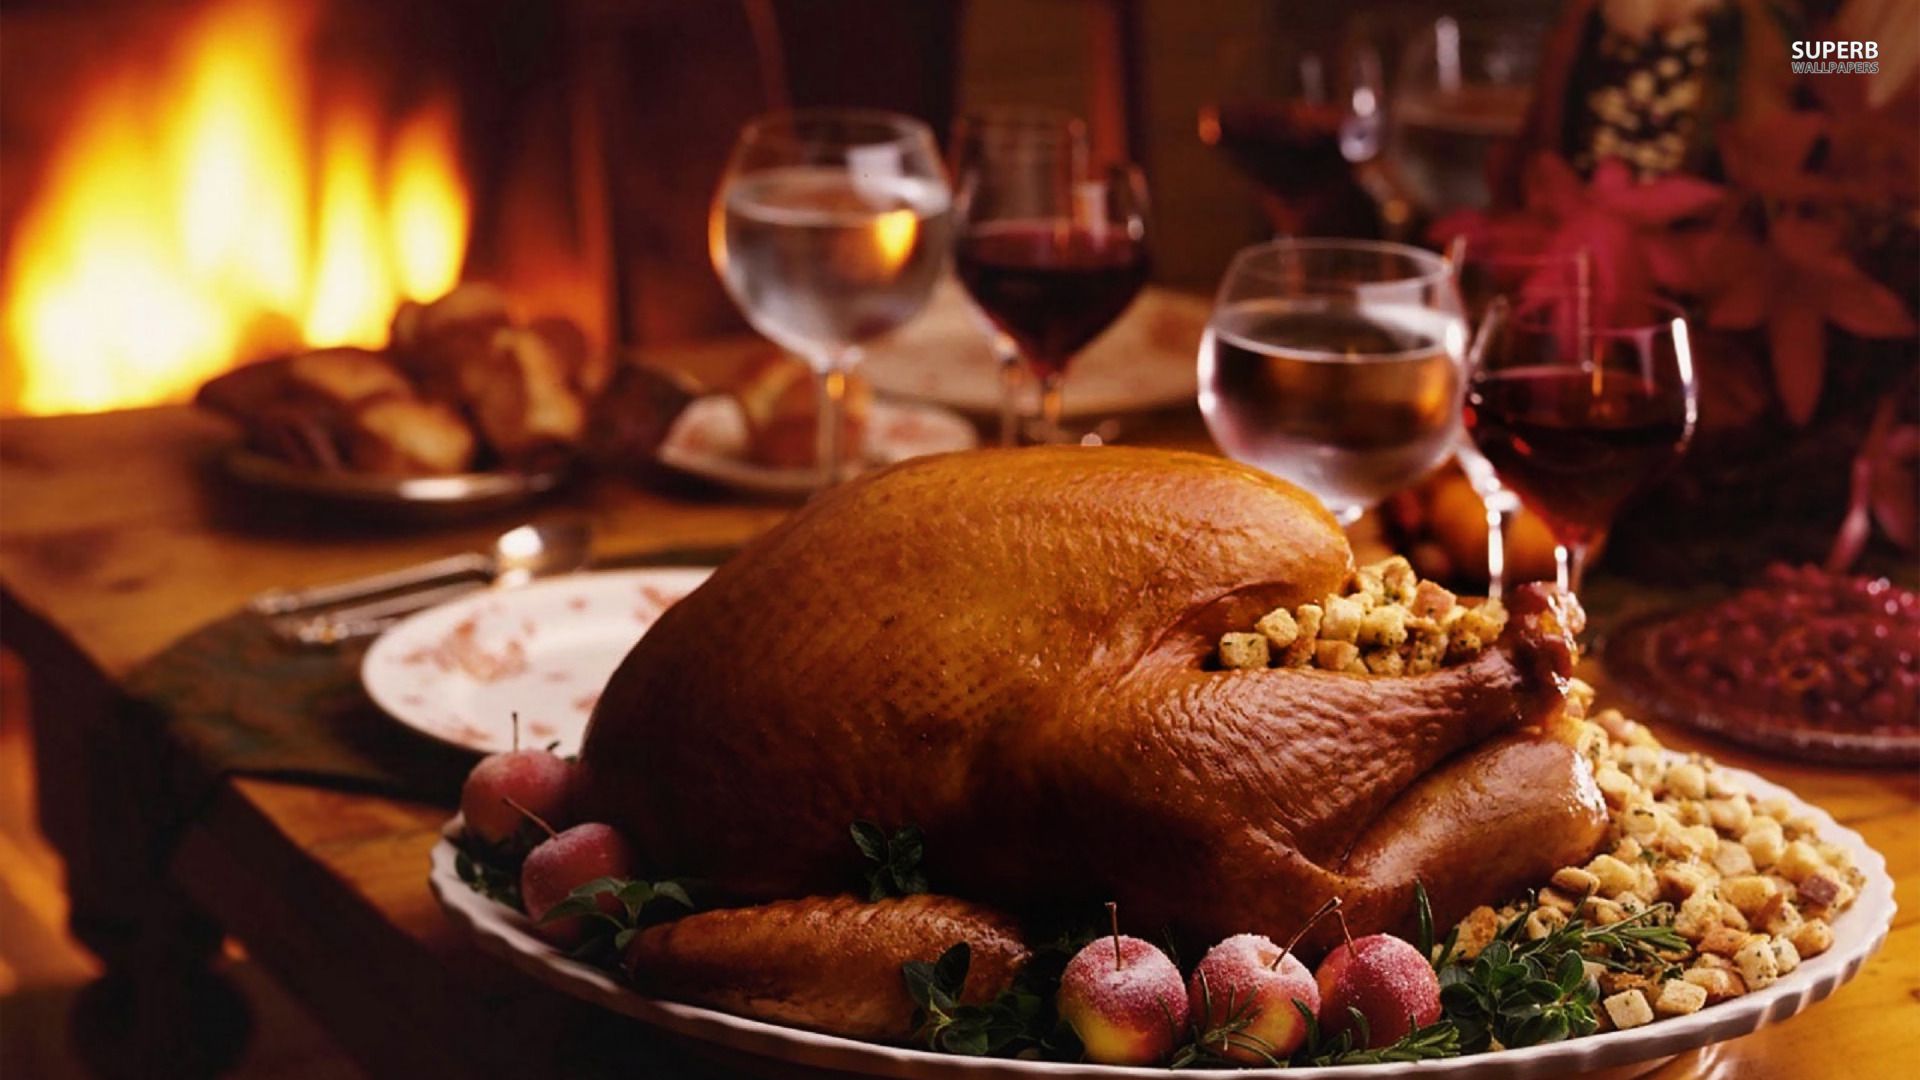 thanksgiving HD wallpaper live HD wallpaper android apps on play, image happy thanksgiving HD wallpaper thanksgiving day, thanksgiving wallpaper HD wallpaper pulse, 1366 x 768 thanksgiving wallpaper